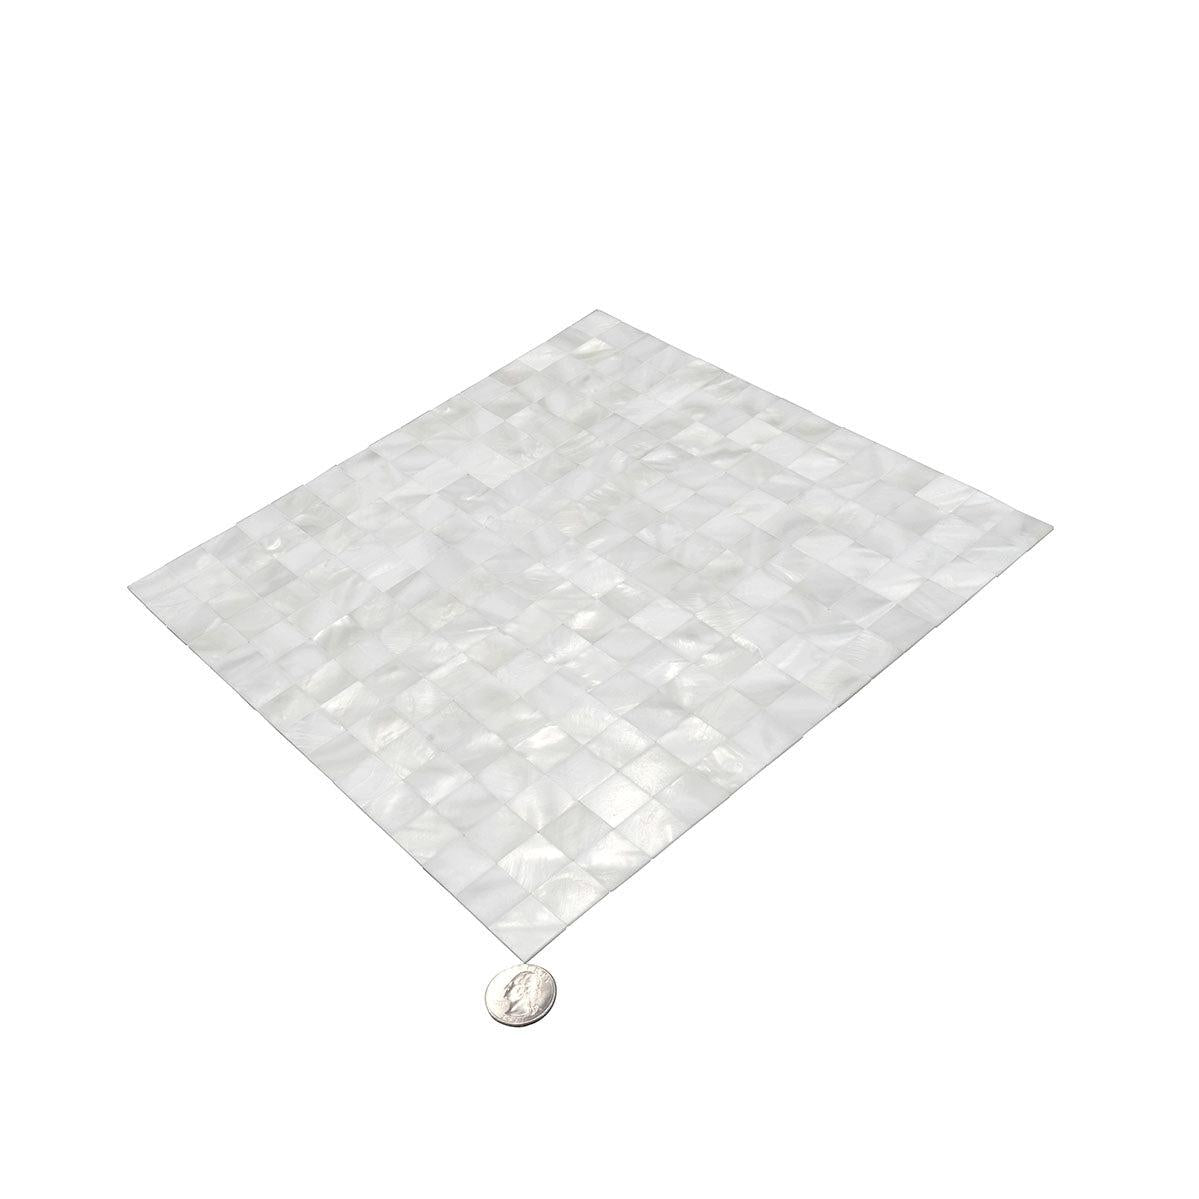 Pearl White Mother Of Shell Tight Joints Square Mosaic